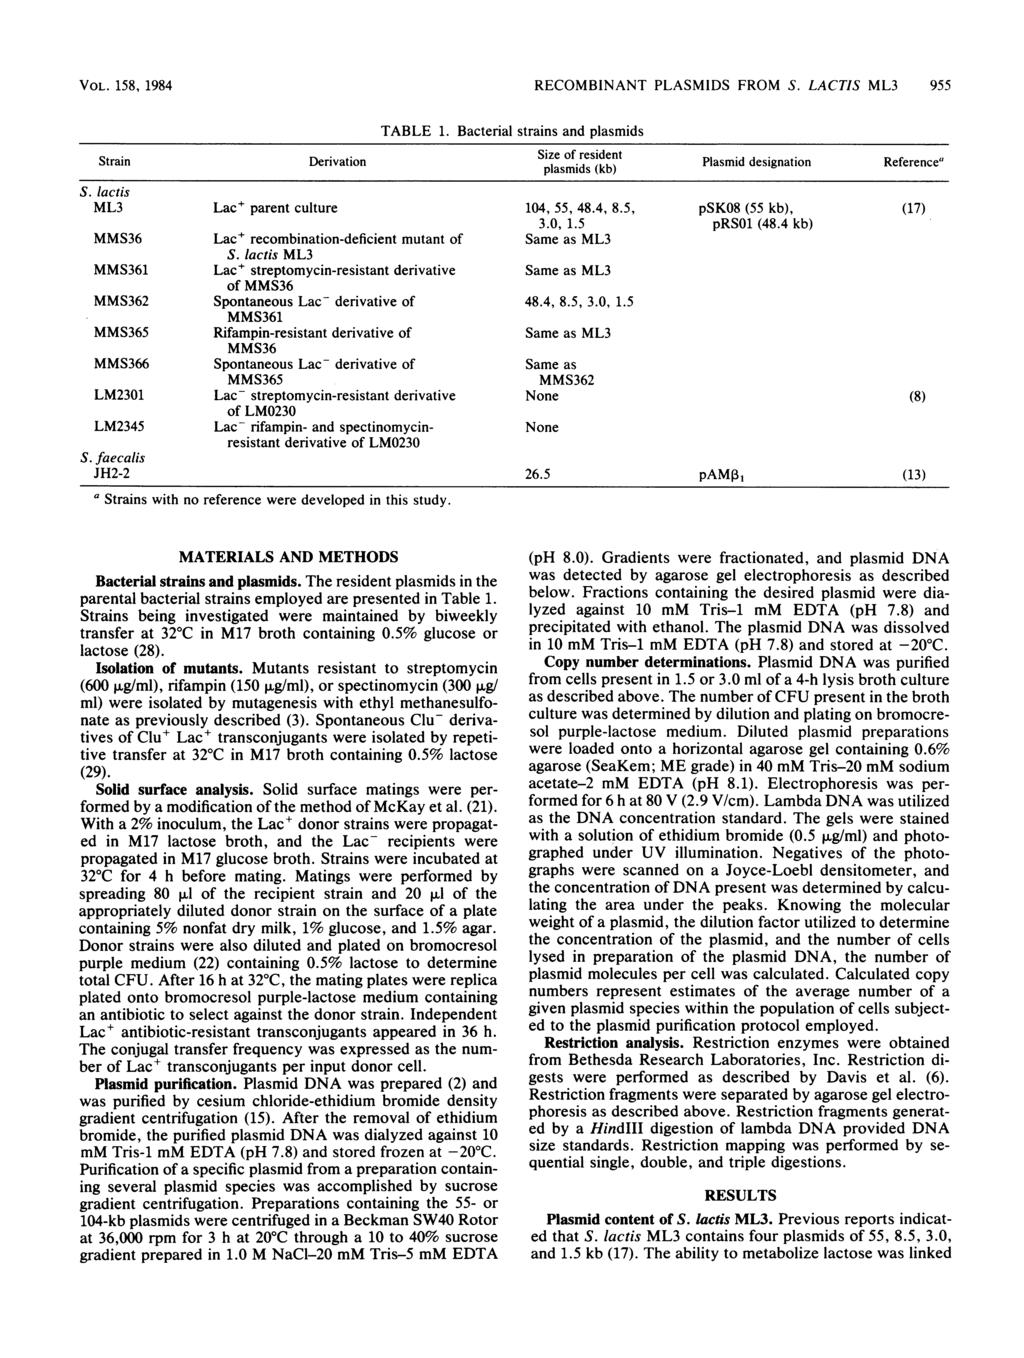 VOL. 158, 1984 RECOMINANT PLASMIDS FROM S. LACTIS ML3 955 TALE 1. acterial strains and plasmids Strain Derivation Size of resident Plasmid designation Referencea plasmids (kb) S.